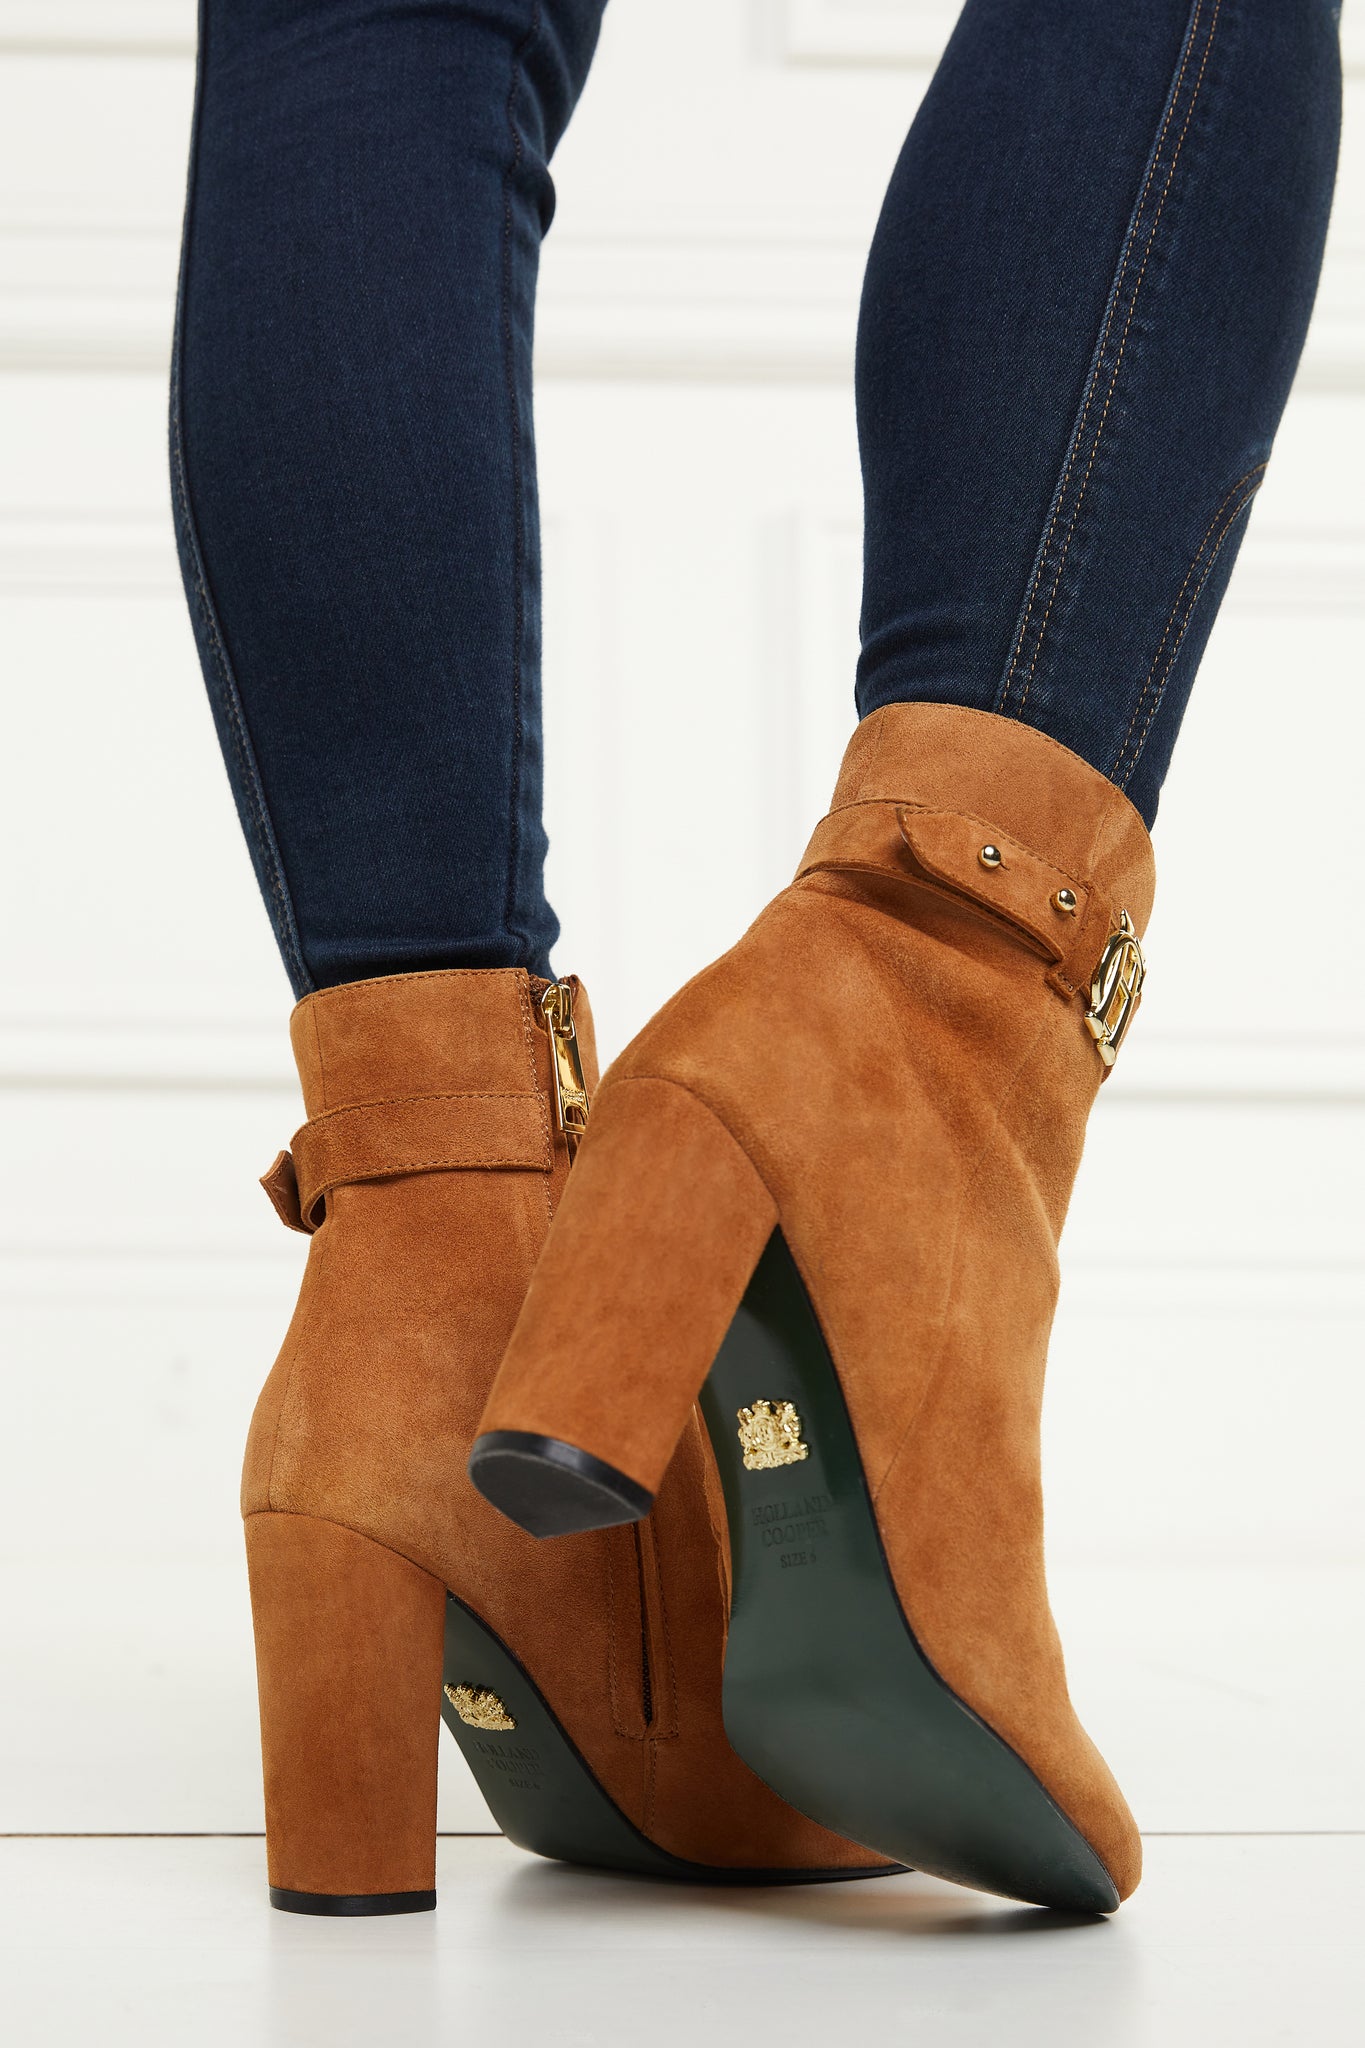 Mayfair Suede Ankle Boot (Tan)